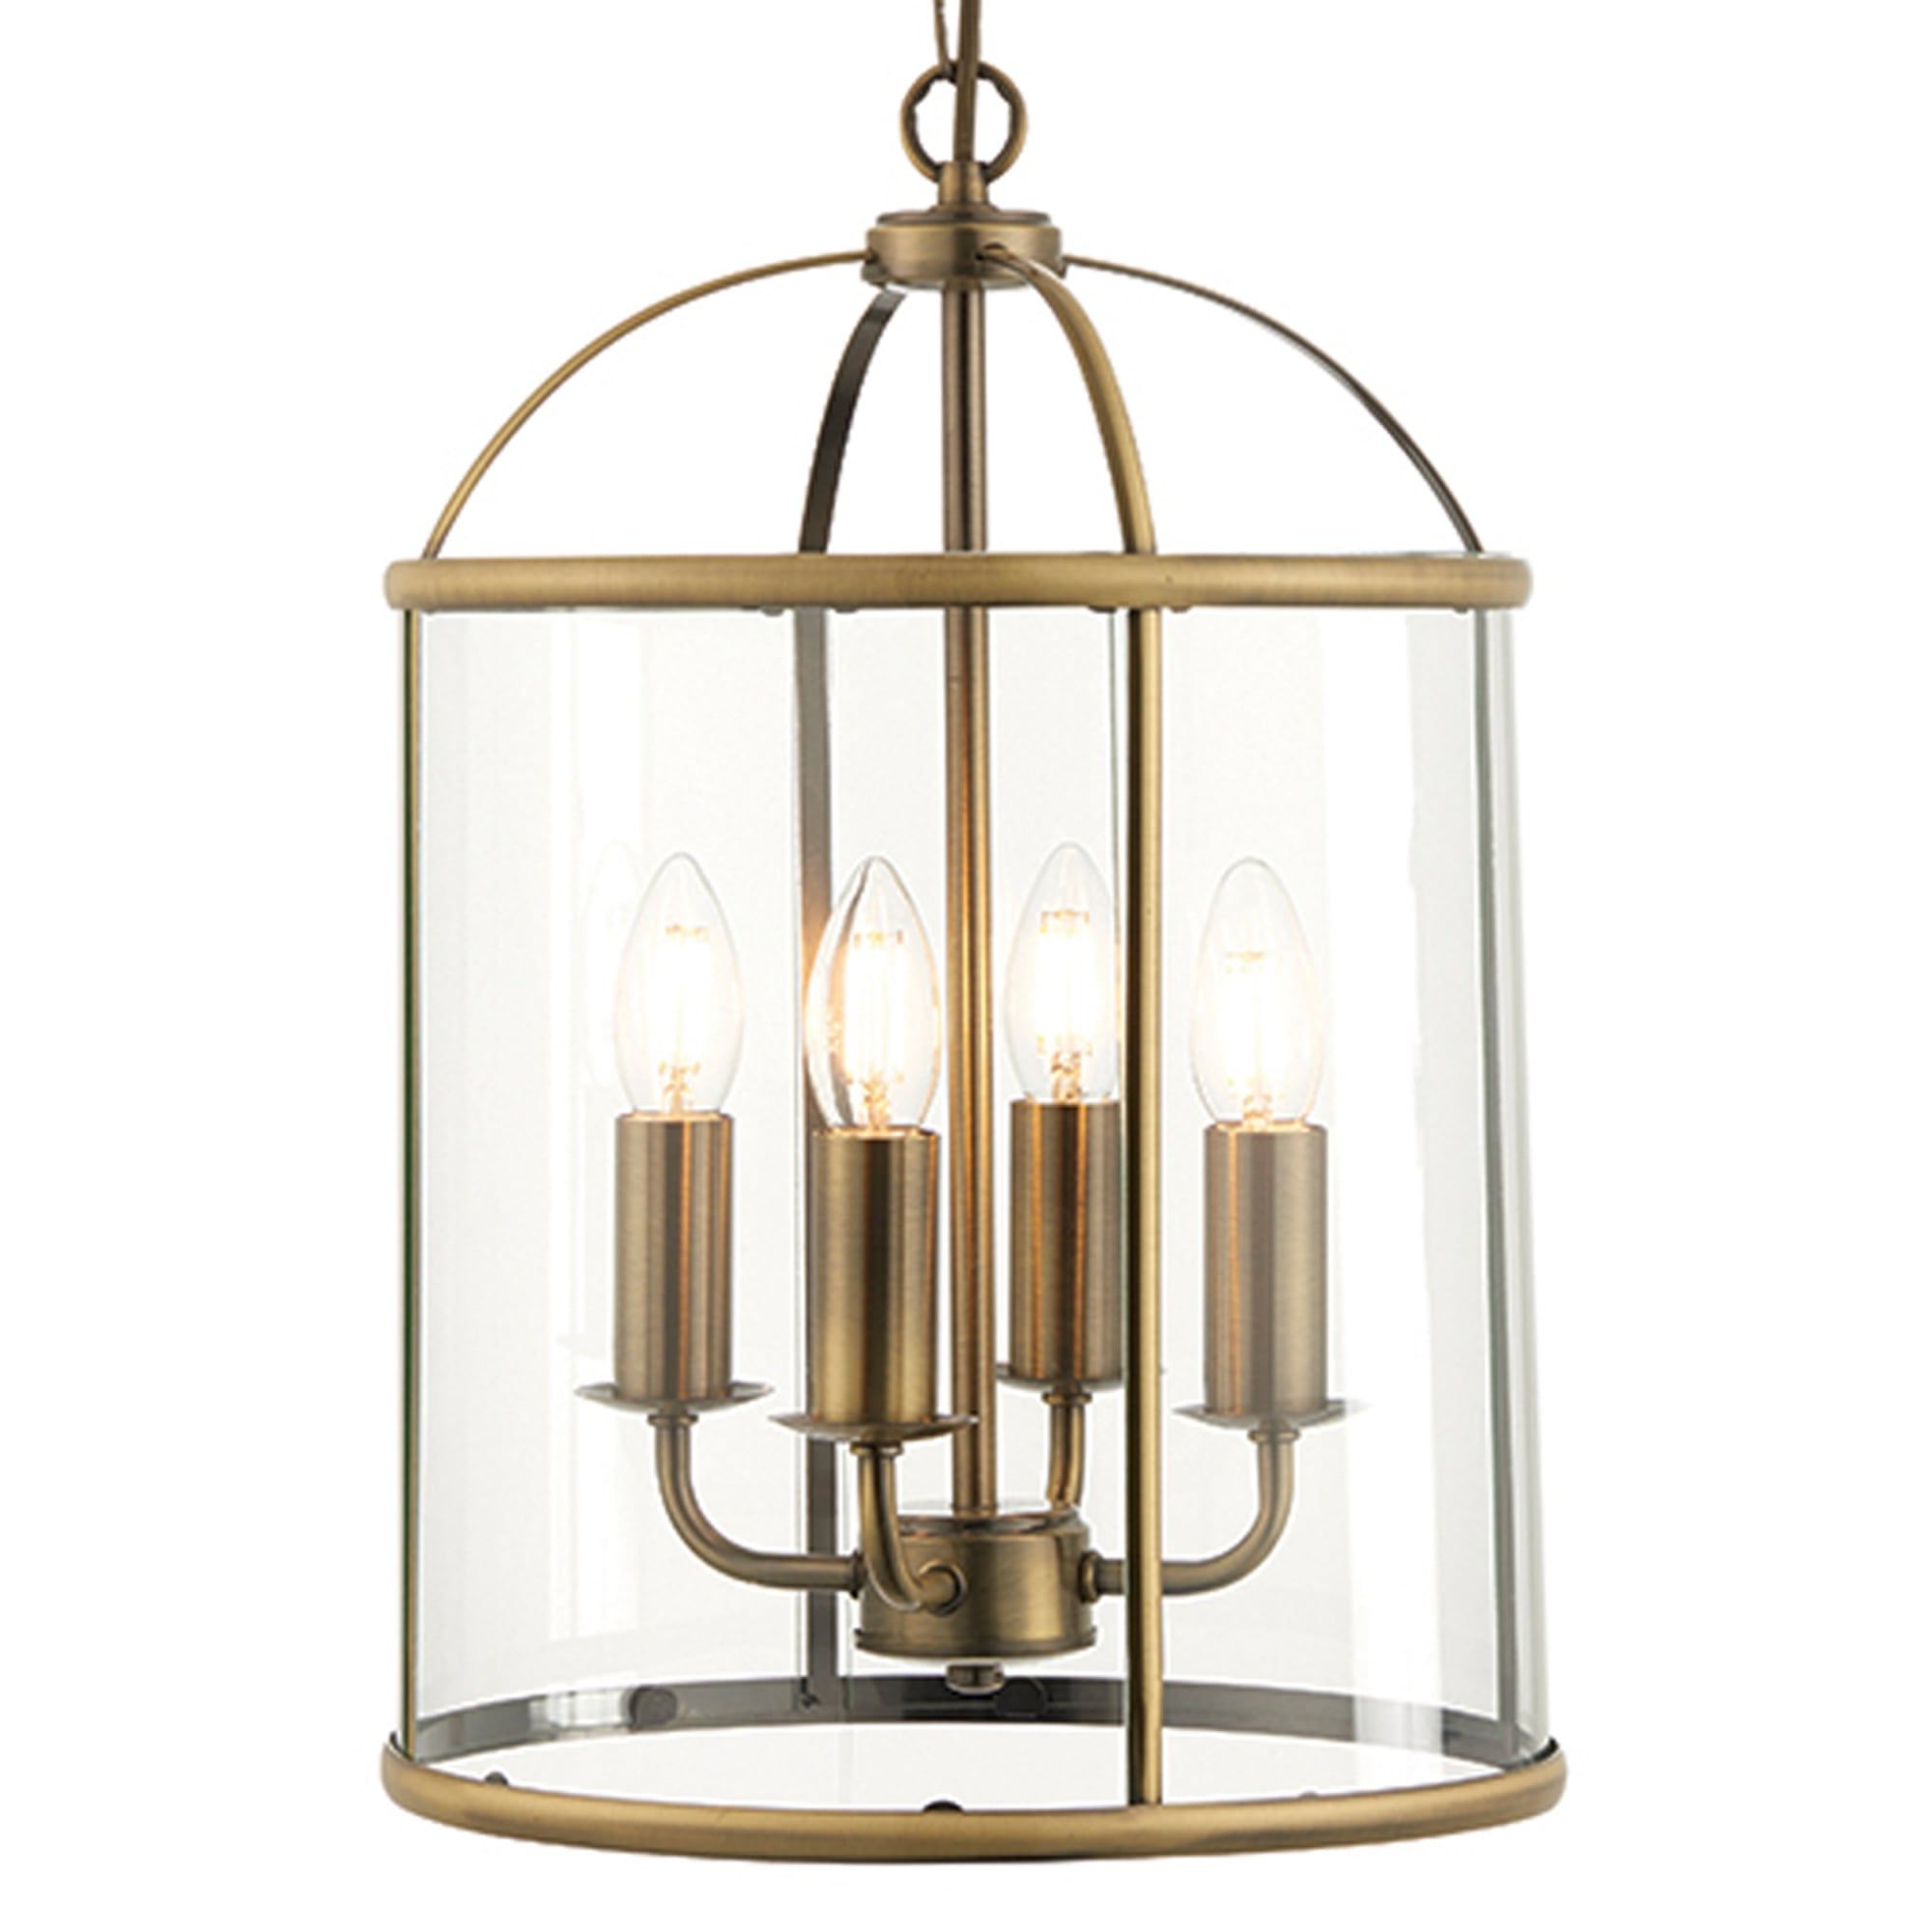 Endon 69455 Lambeth 4 Light Antique Brass And Glass Lantern Pendant In 2020 Four Light Lantern Chandeliers (View 13 of 15)